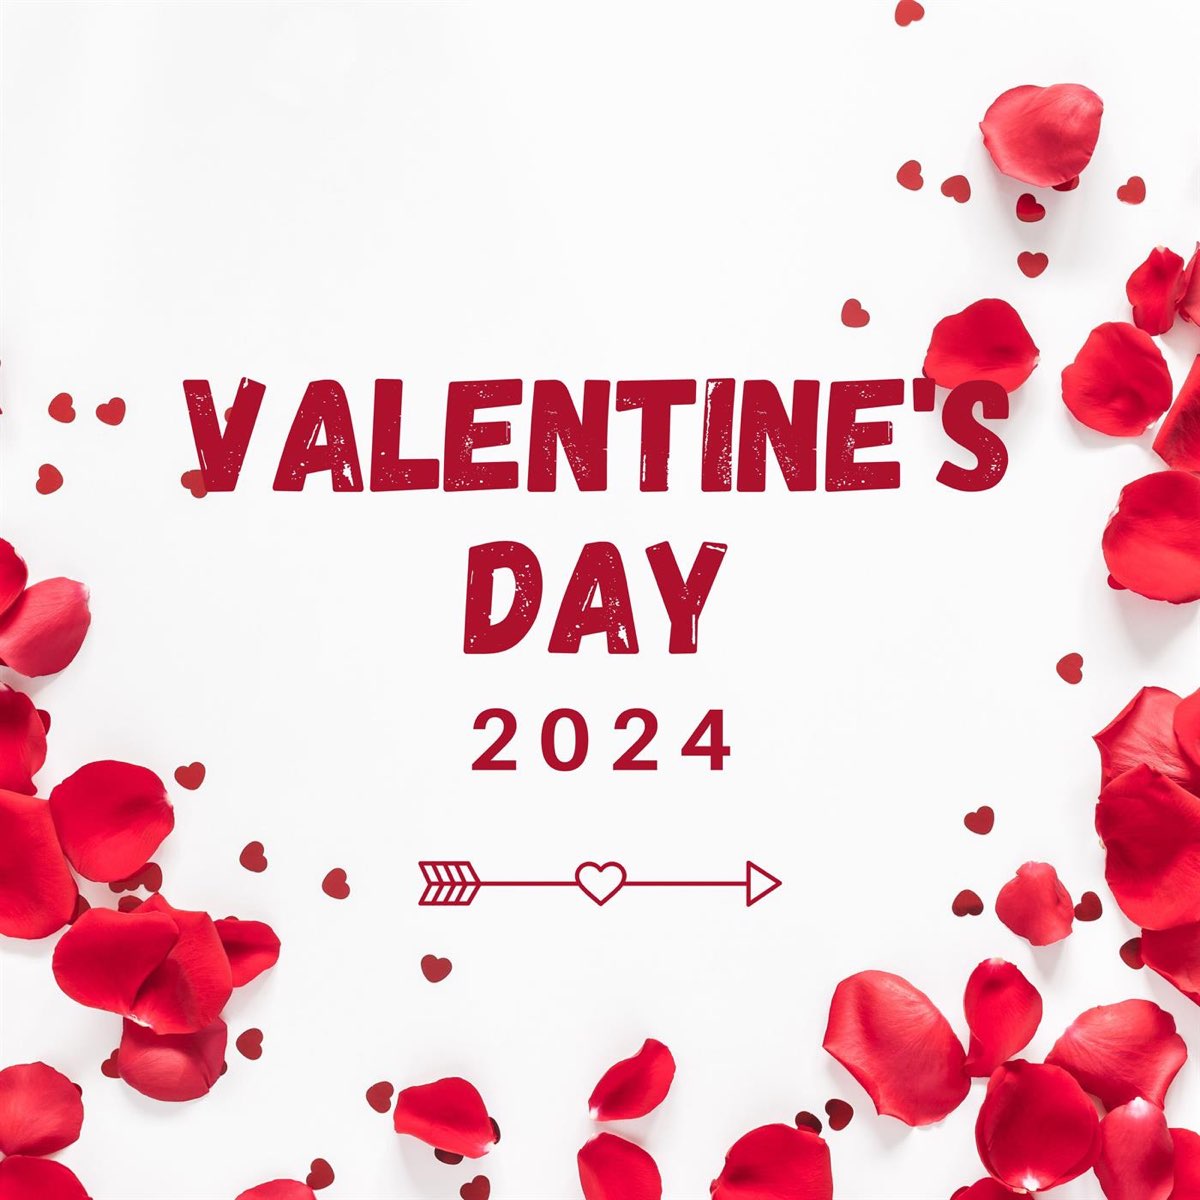 ‎Valentine's Day 2024 - Album by Various Artists - Apple Music